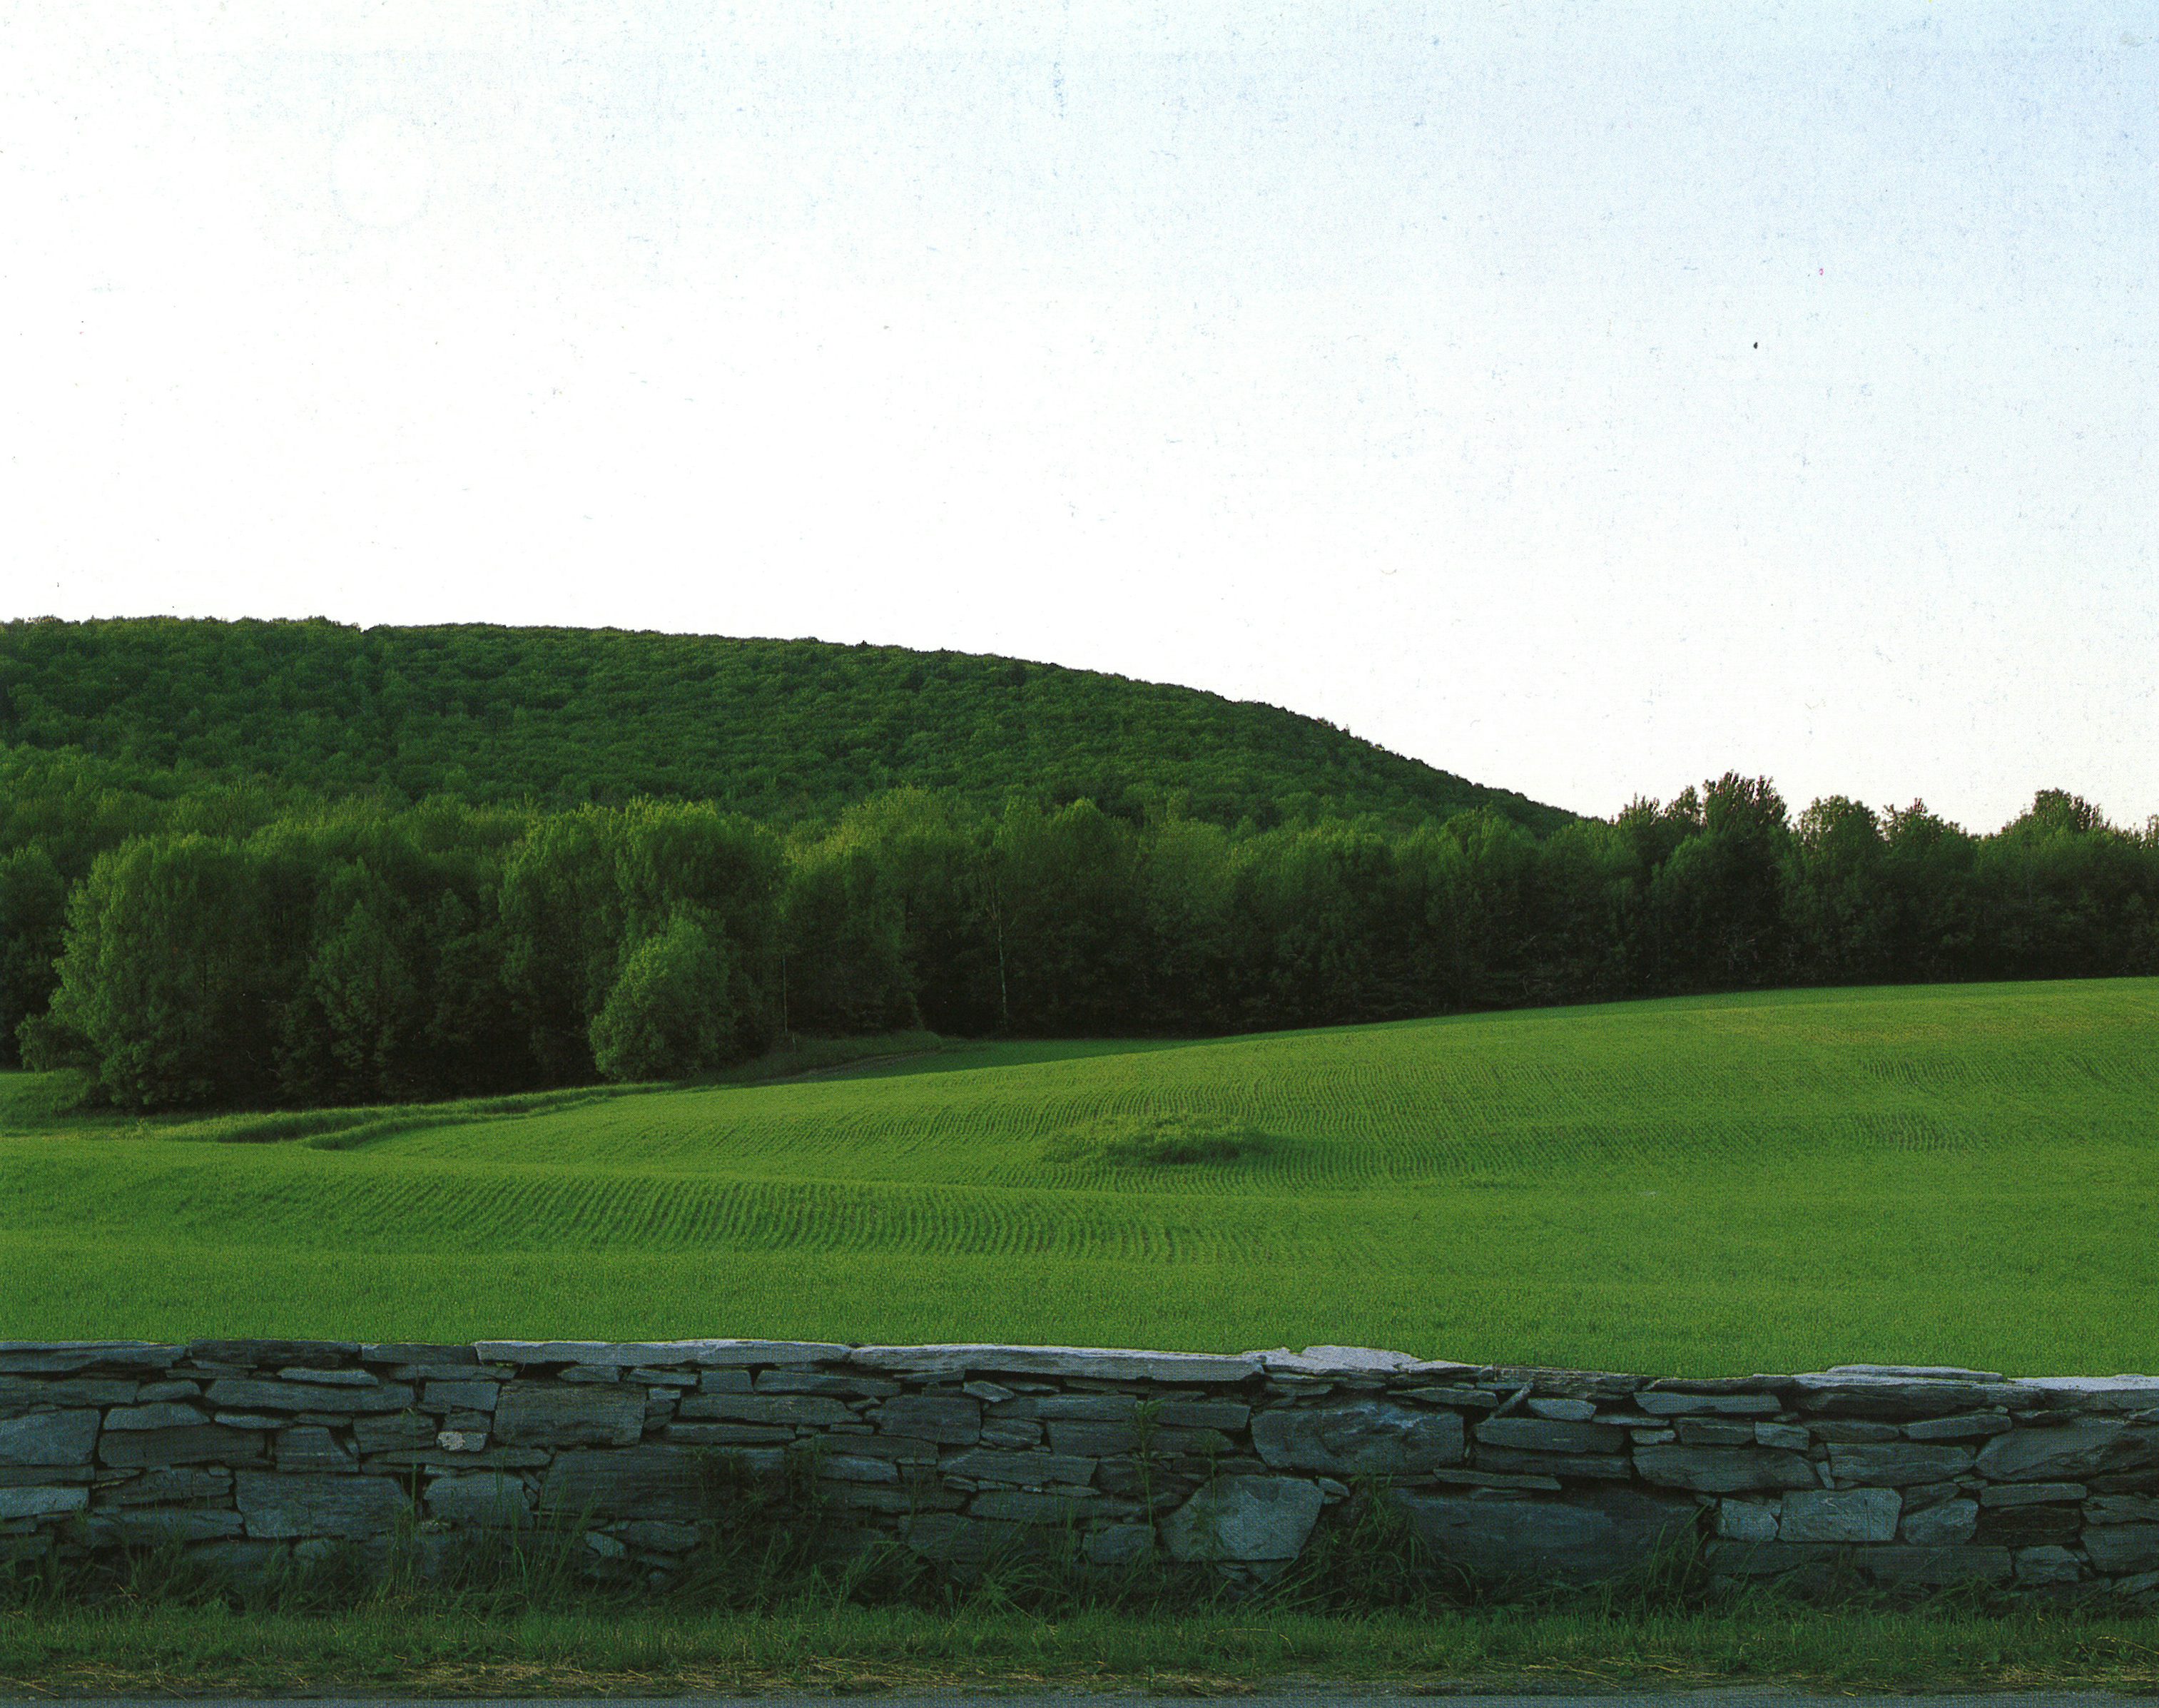 Shaker ‘families’ usually emerged on land or farm structures committed by Believers across New England. This practice eventually shaped Shaker society, as a network of villages with substantial land holdings across the country. Shaker field flanked by a drystone masonry wall that would divide fields from woodlots, Hancock Shaker Village, MA